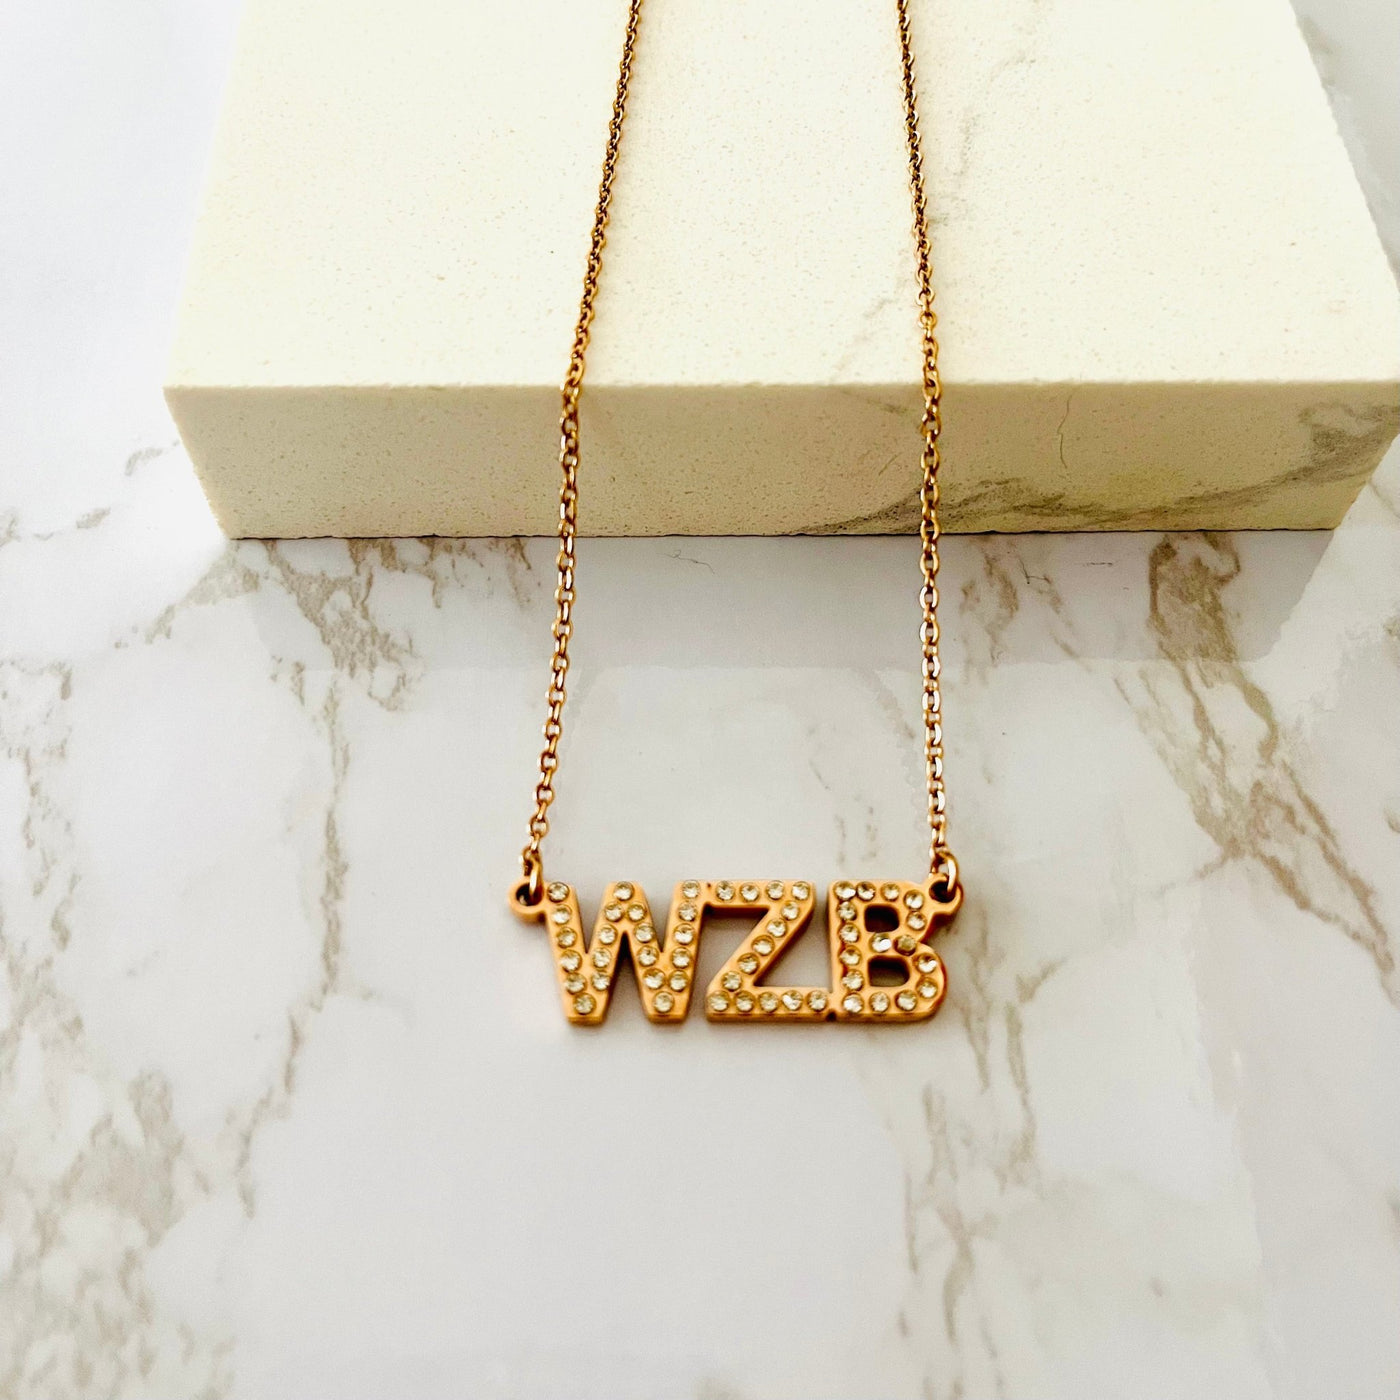 Personalized Pave Name Necklace - "The Samantha - Capsul